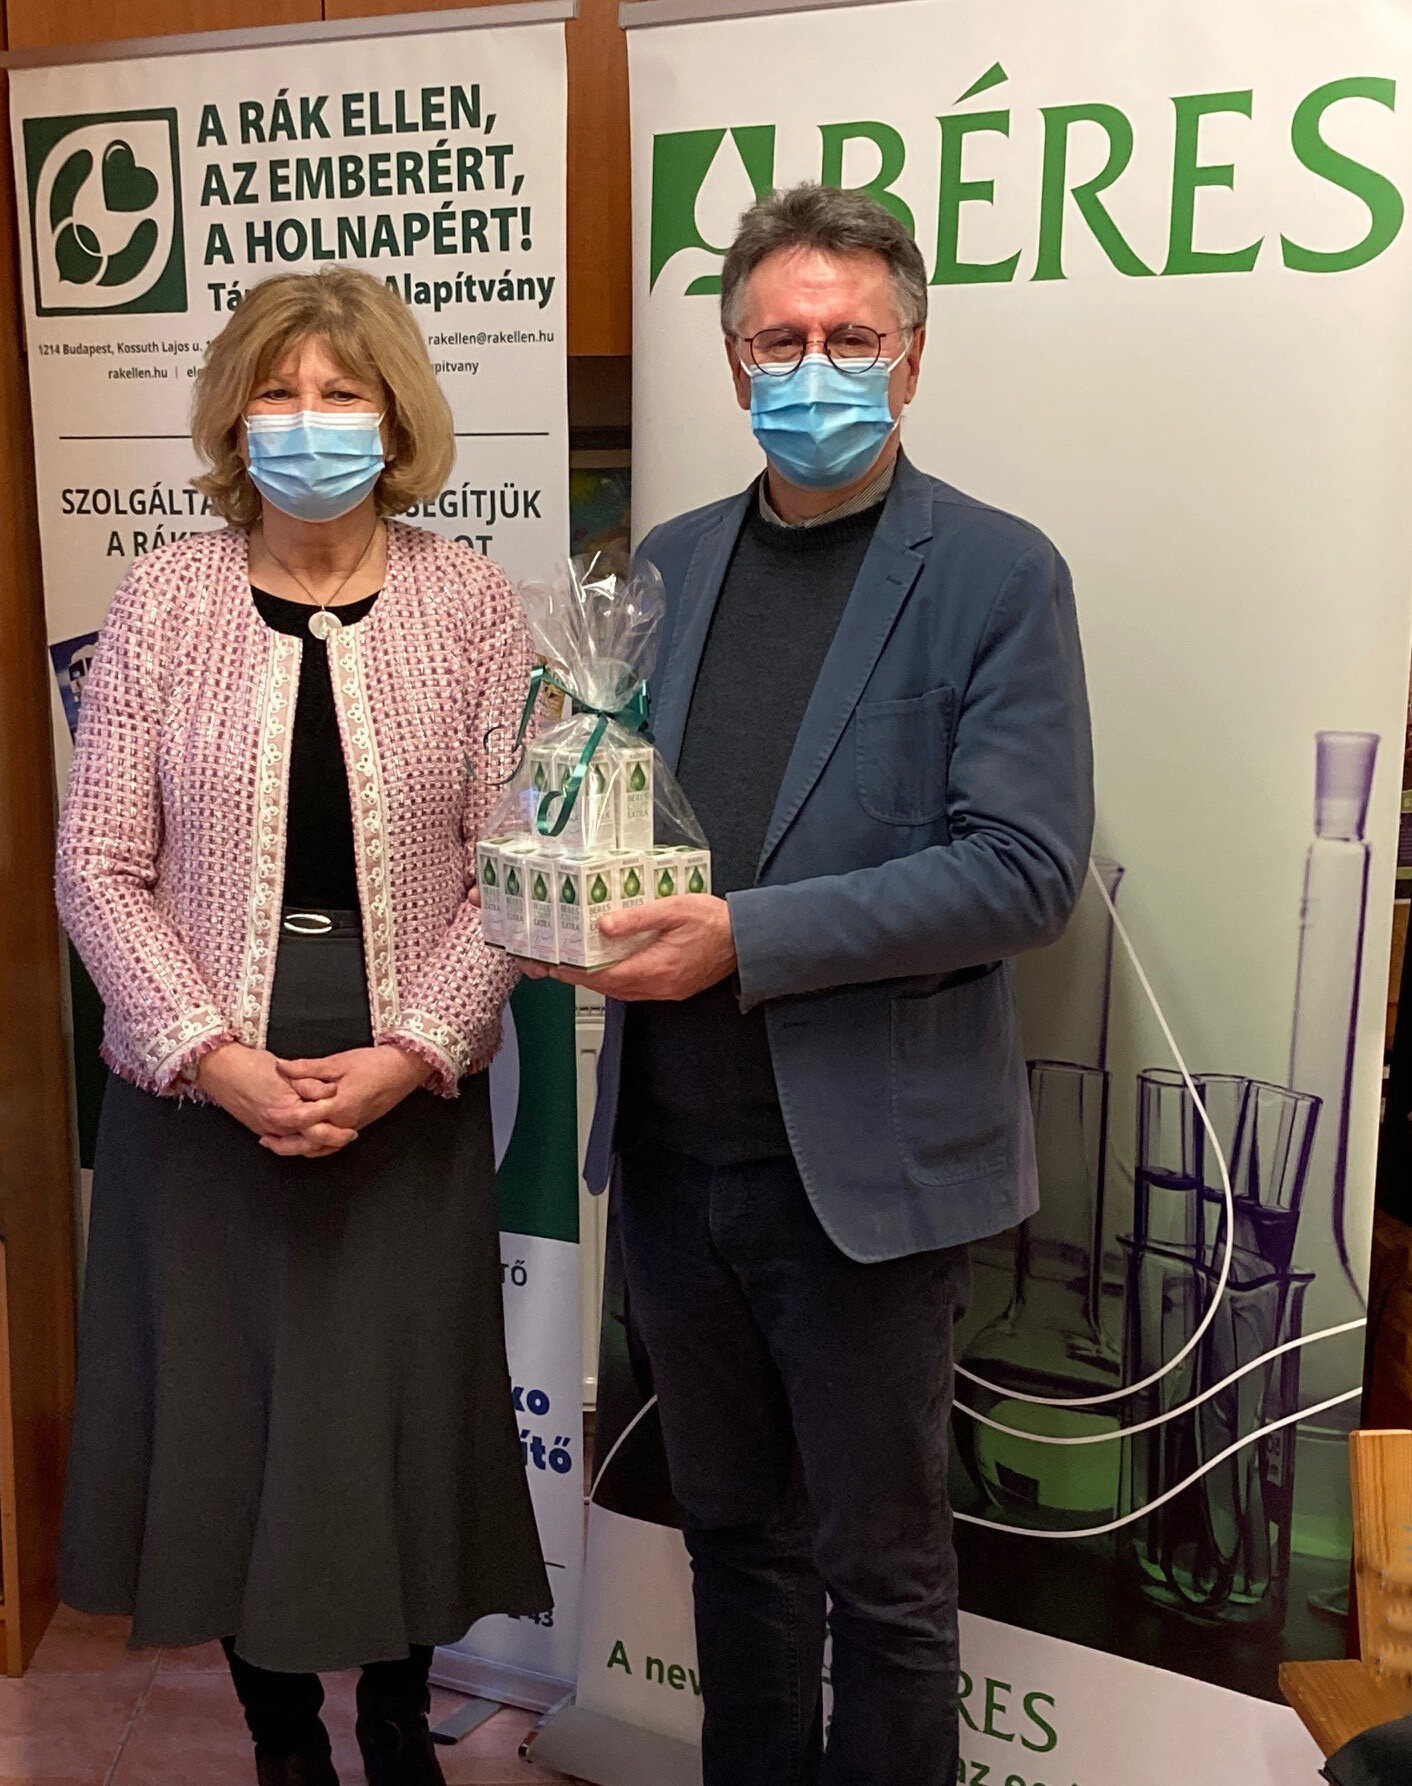 DONATION, COHESION 21,000 bottles of Béres Drops for cancer patients